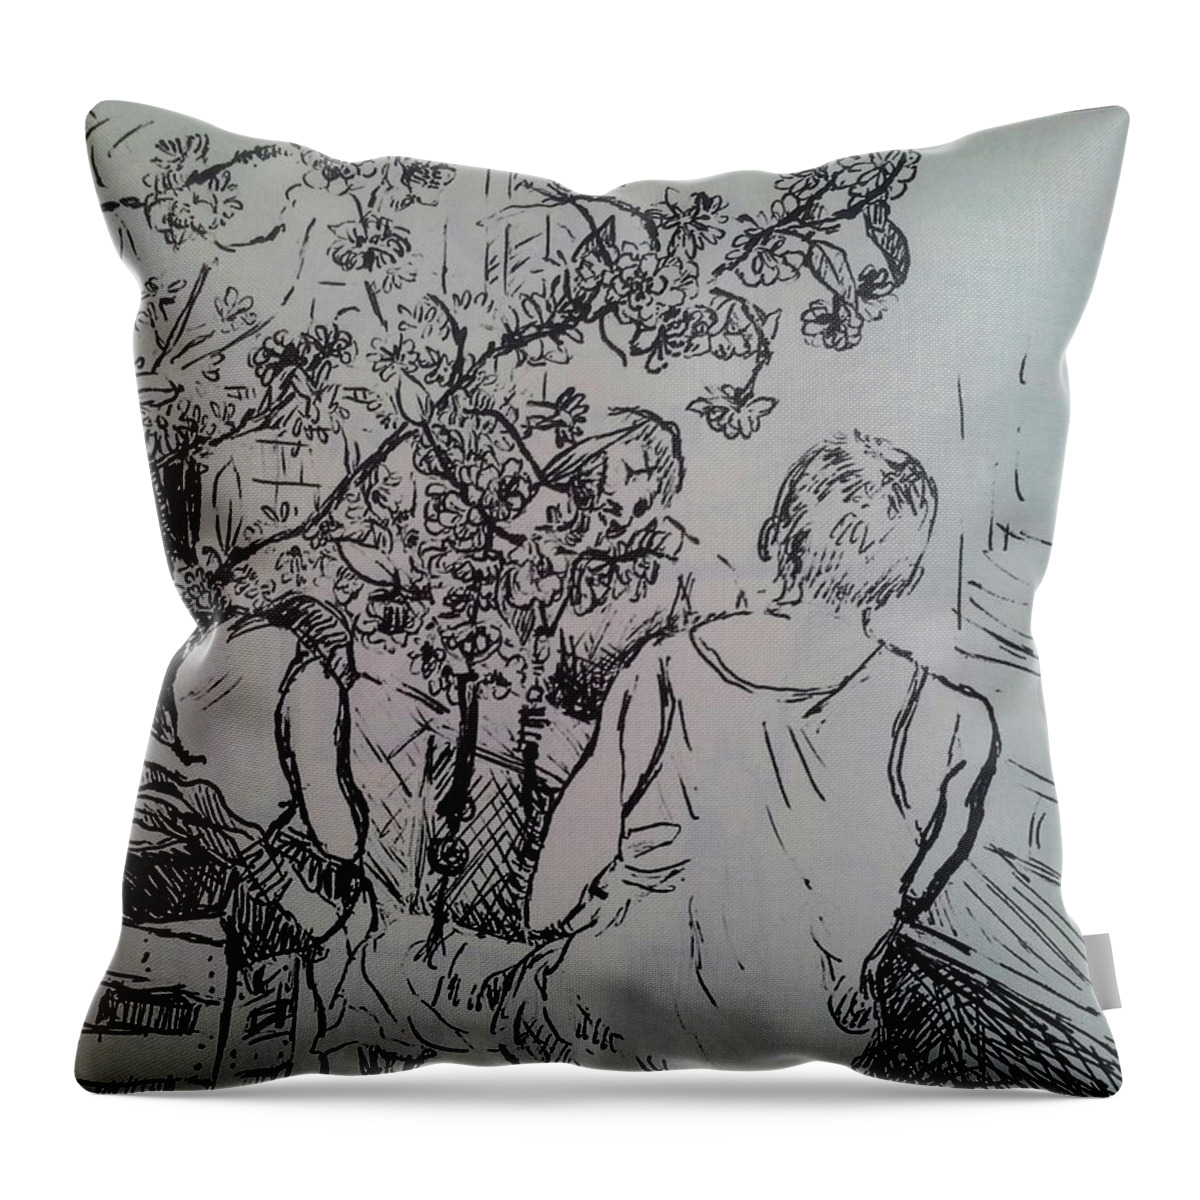 Tourist Throw Pillow featuring the drawing Tourist in Ho Chi Minh City by Sukalya Chearanantana